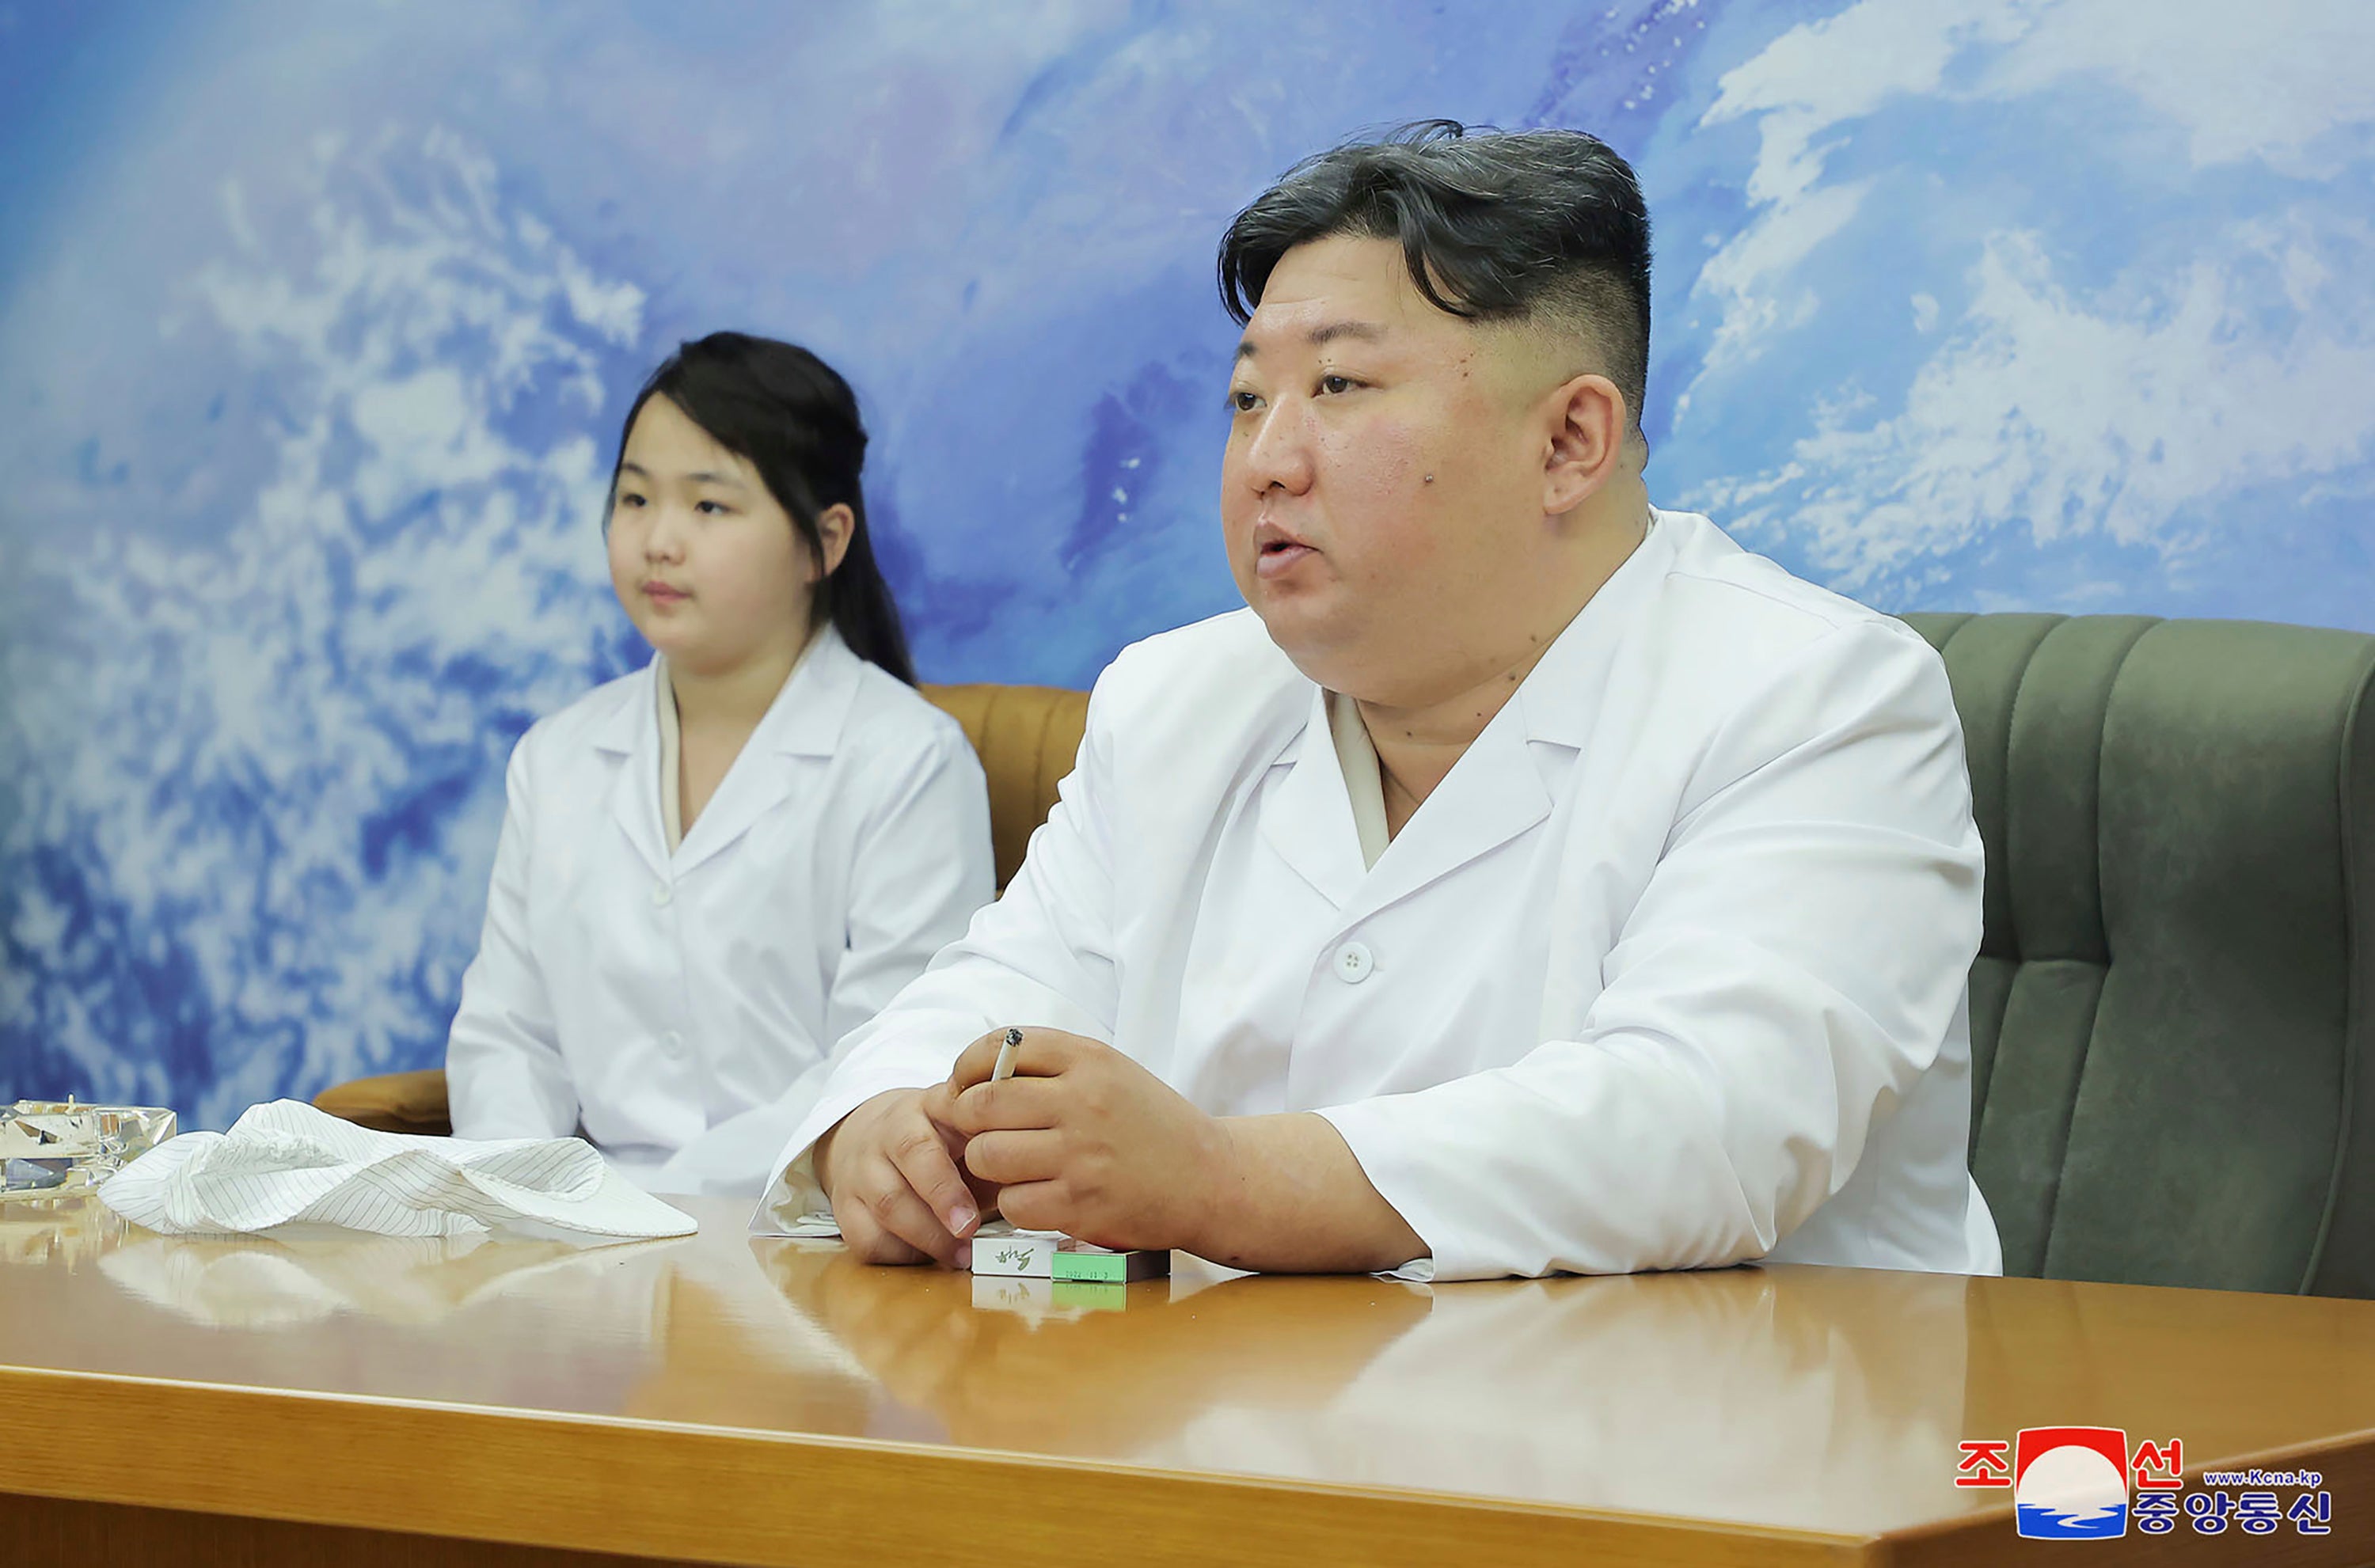 North Korean leader Kim Jong-un, right, and his daughter, Kim Ju-ae, visit the country's aerospace agency on Tuesday